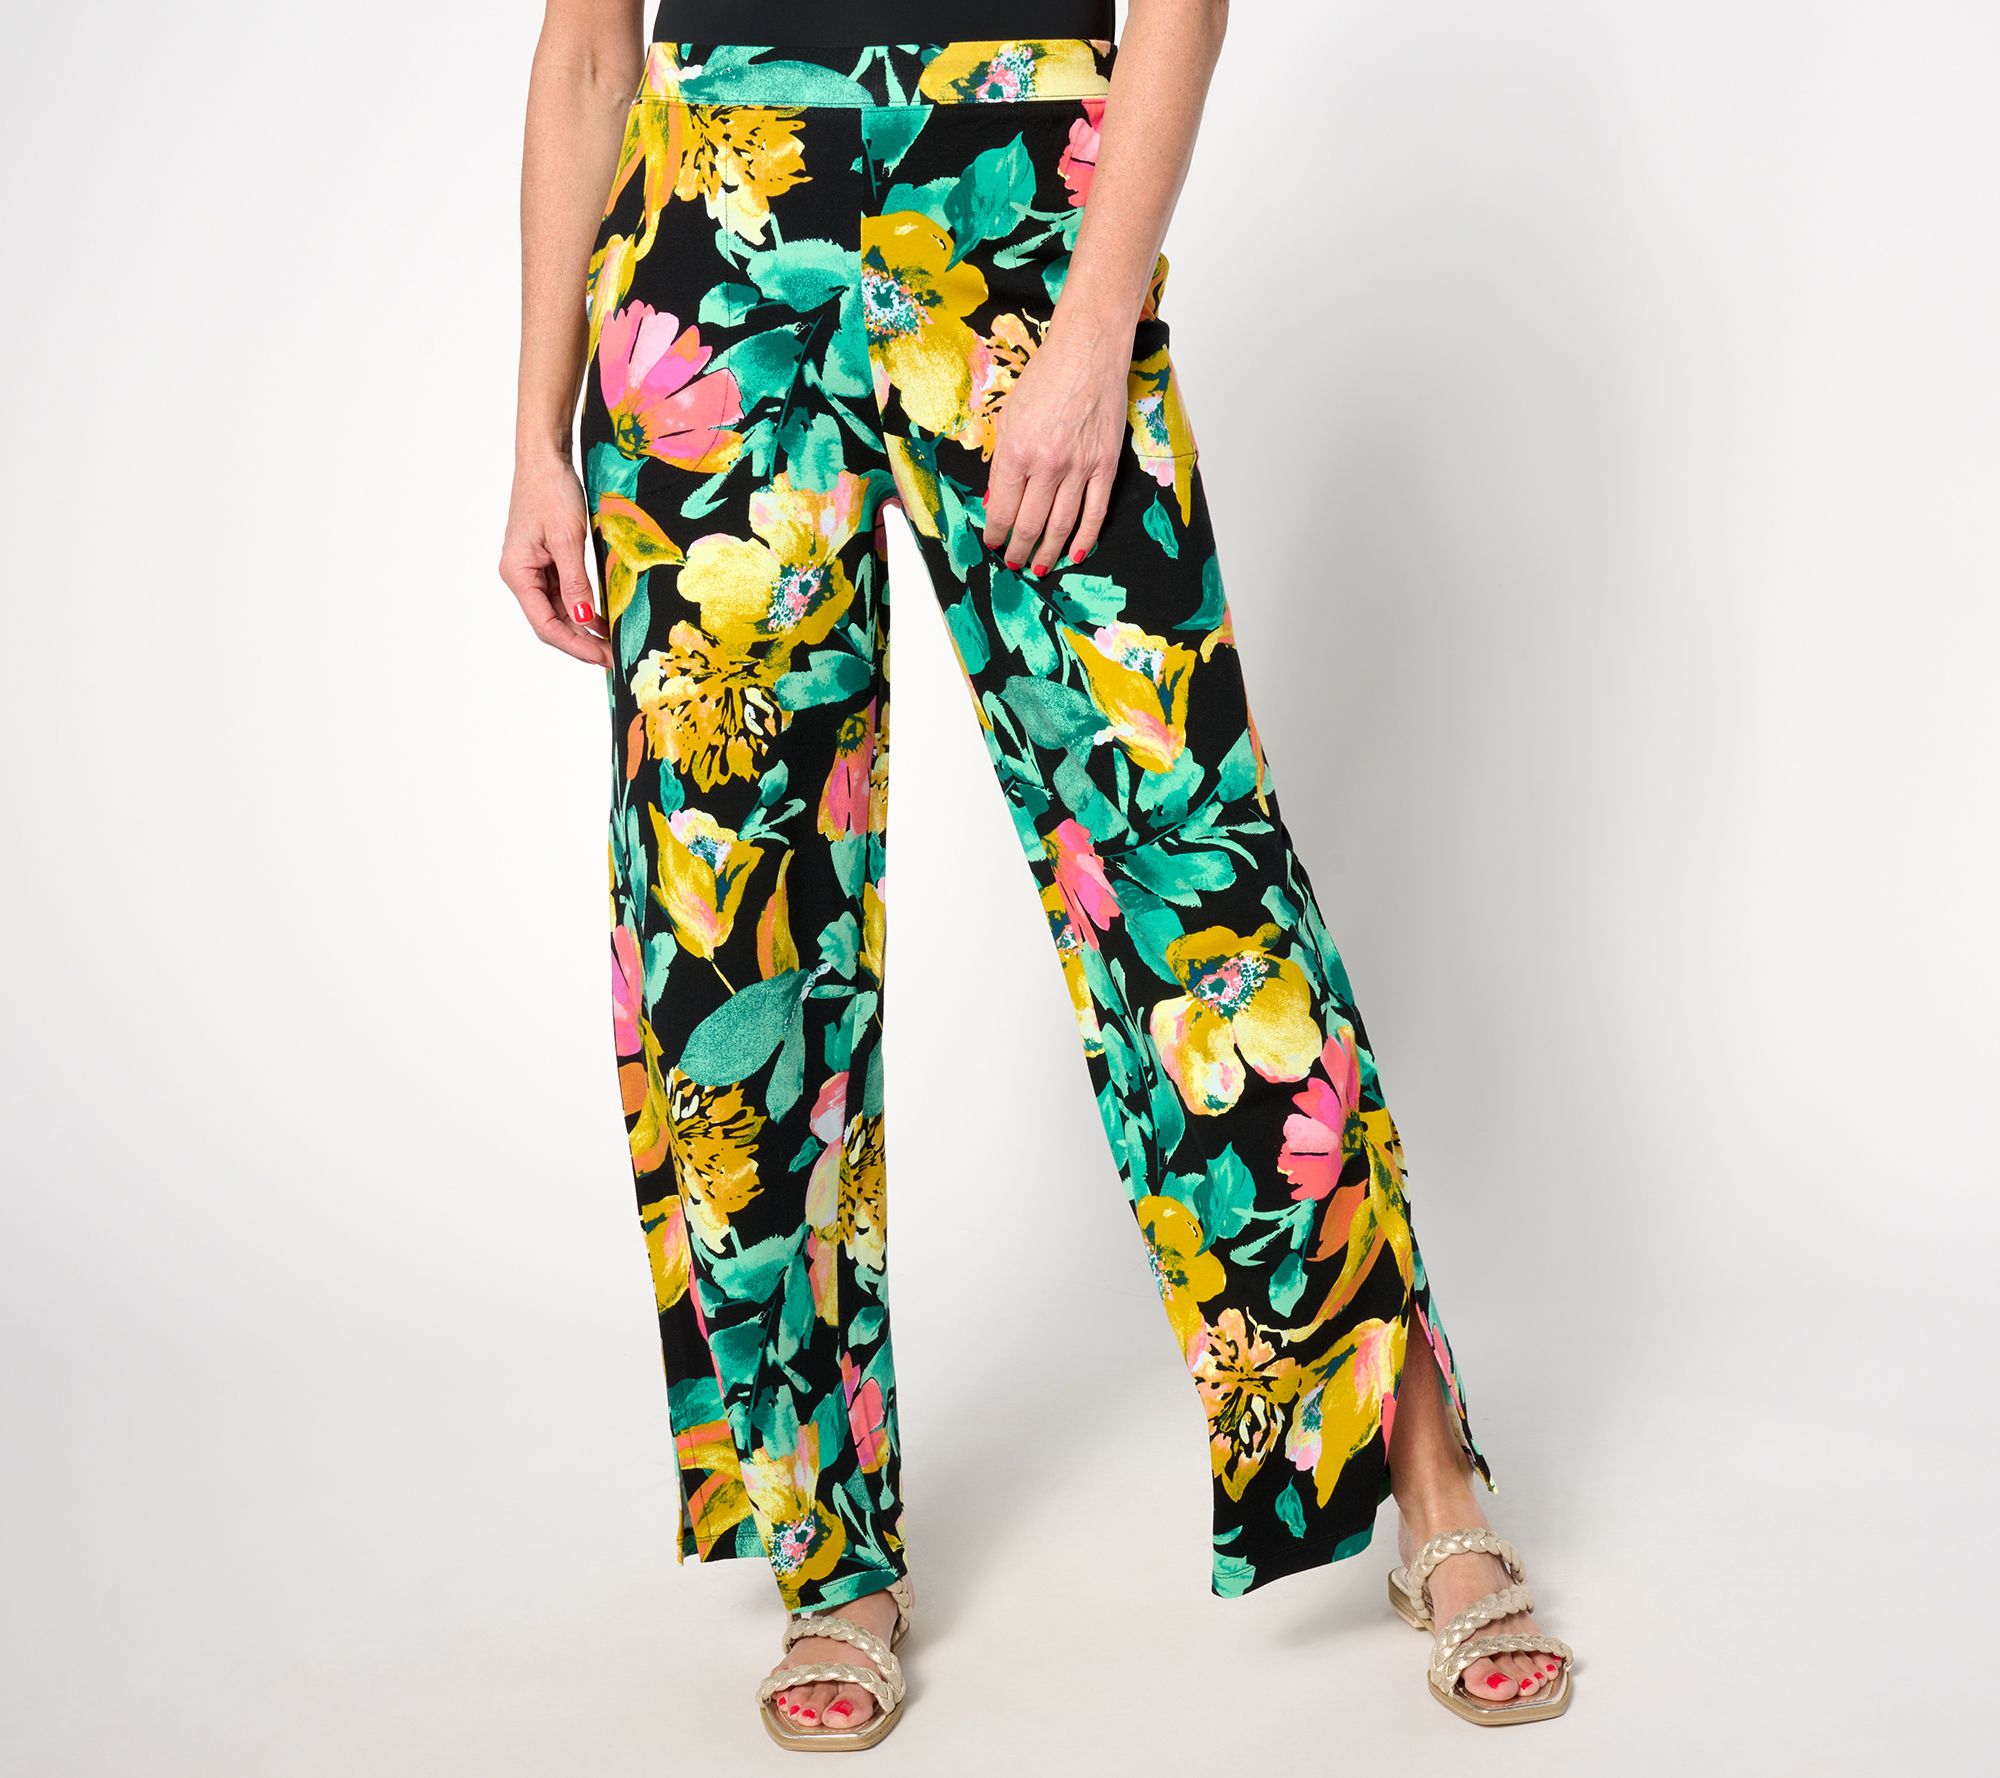 HOW TO STYLE PRINTED PALAZZO PANTS - 50 IS NOT OLD - A Fashion And Beauty  Blog For Women Over 50